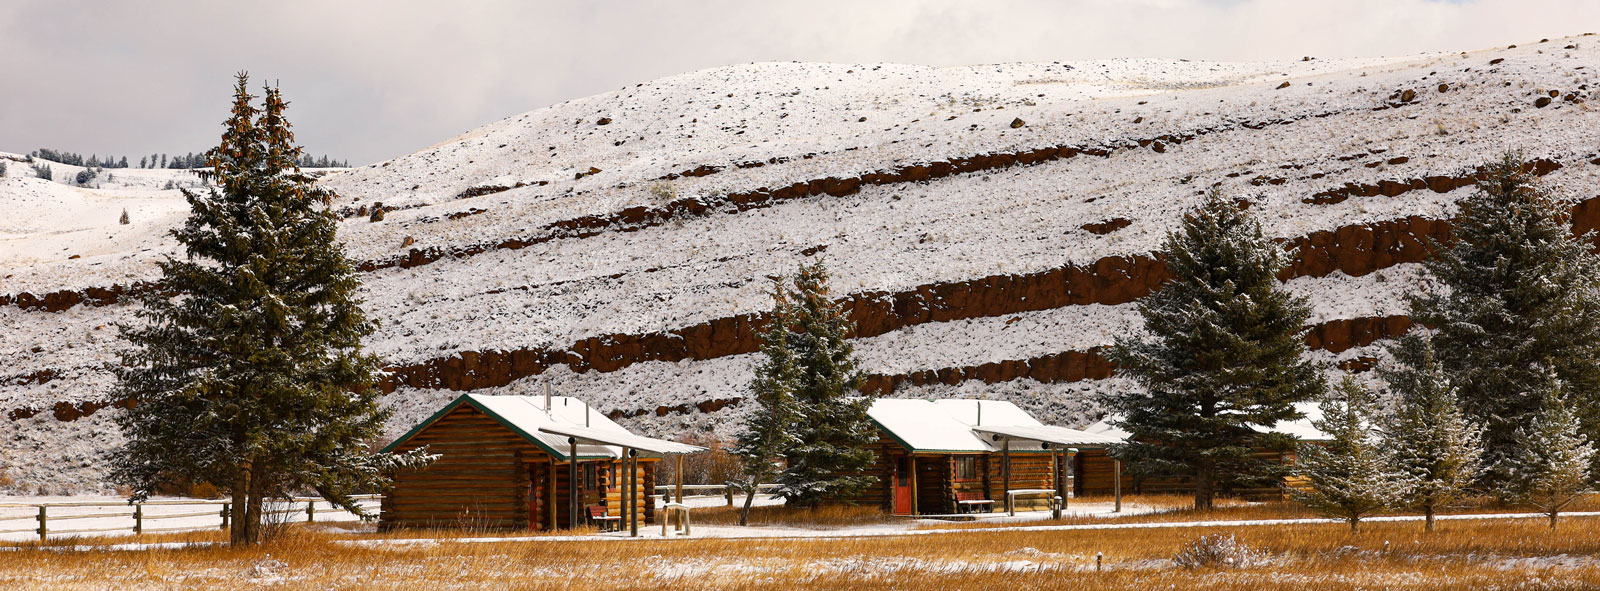 Snow on the cabins on the Red Rock Ranch